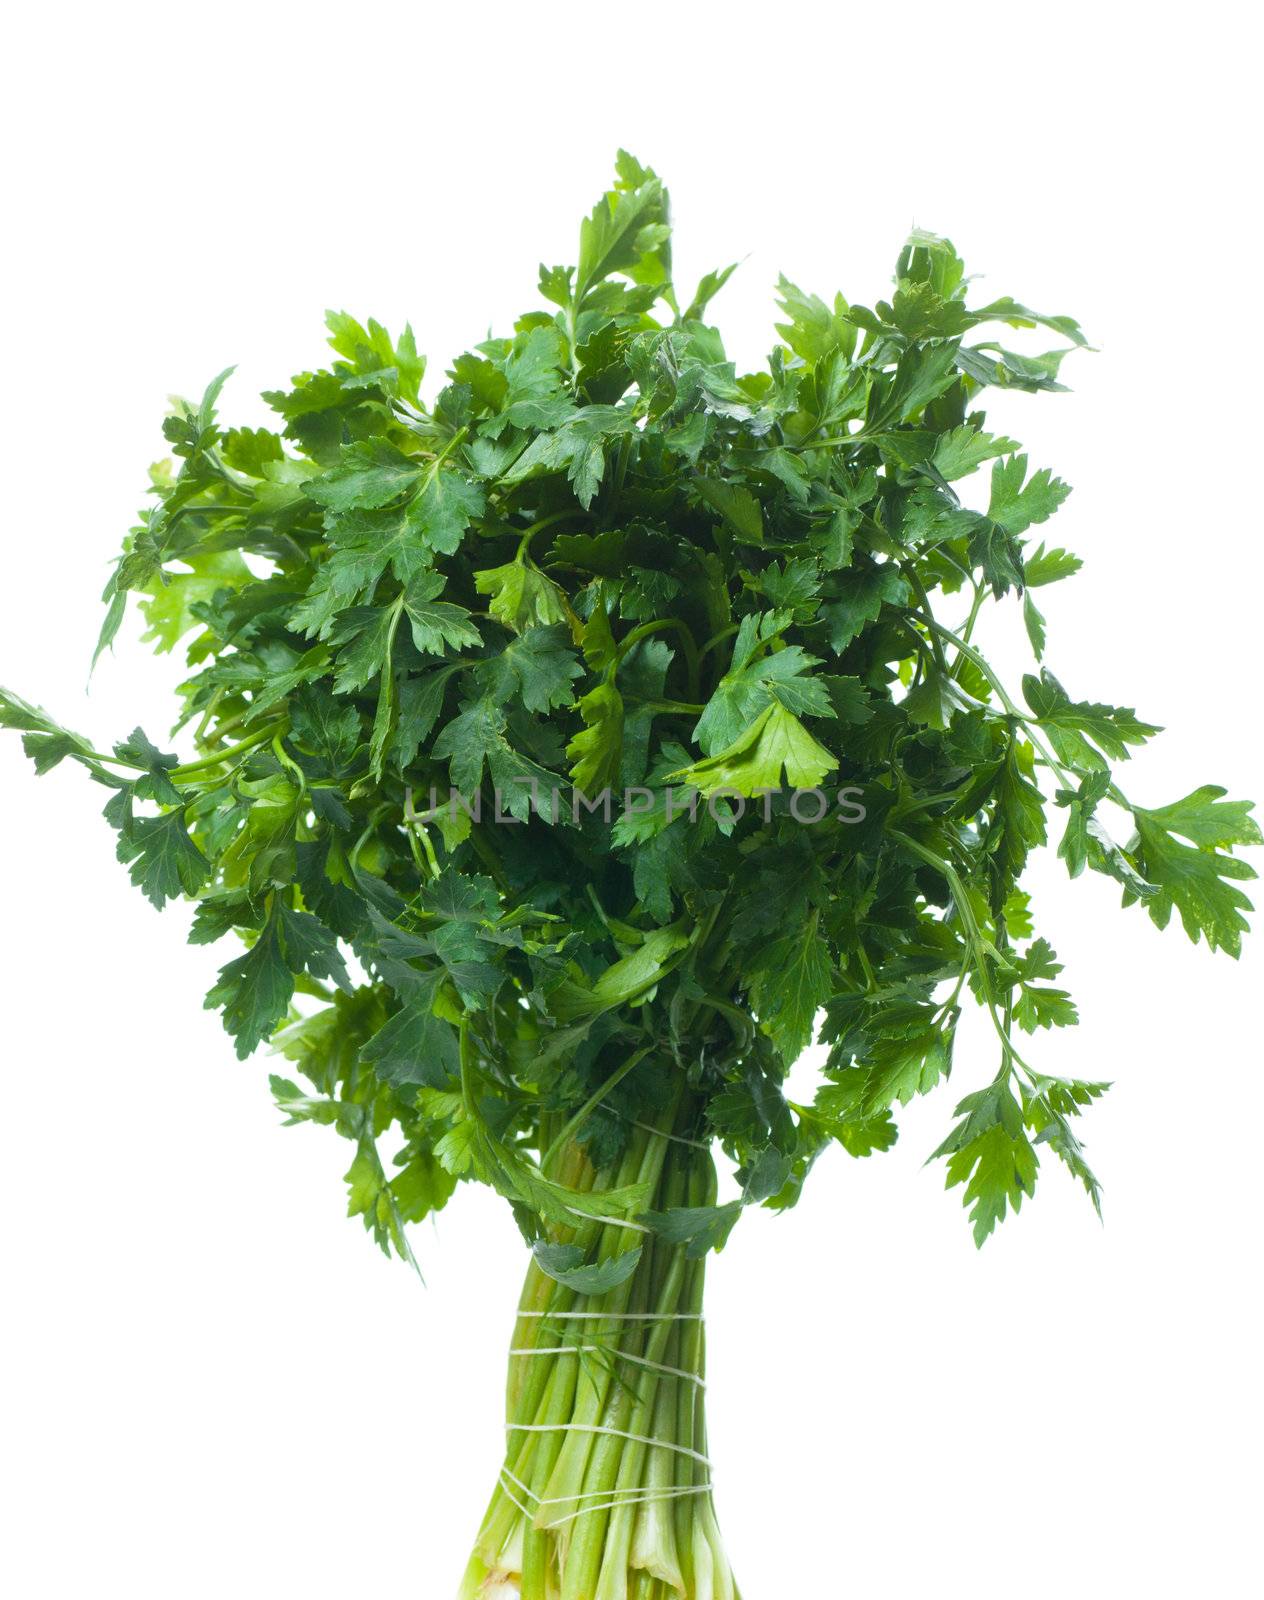 Bunch of fresh parsley isolated over white background